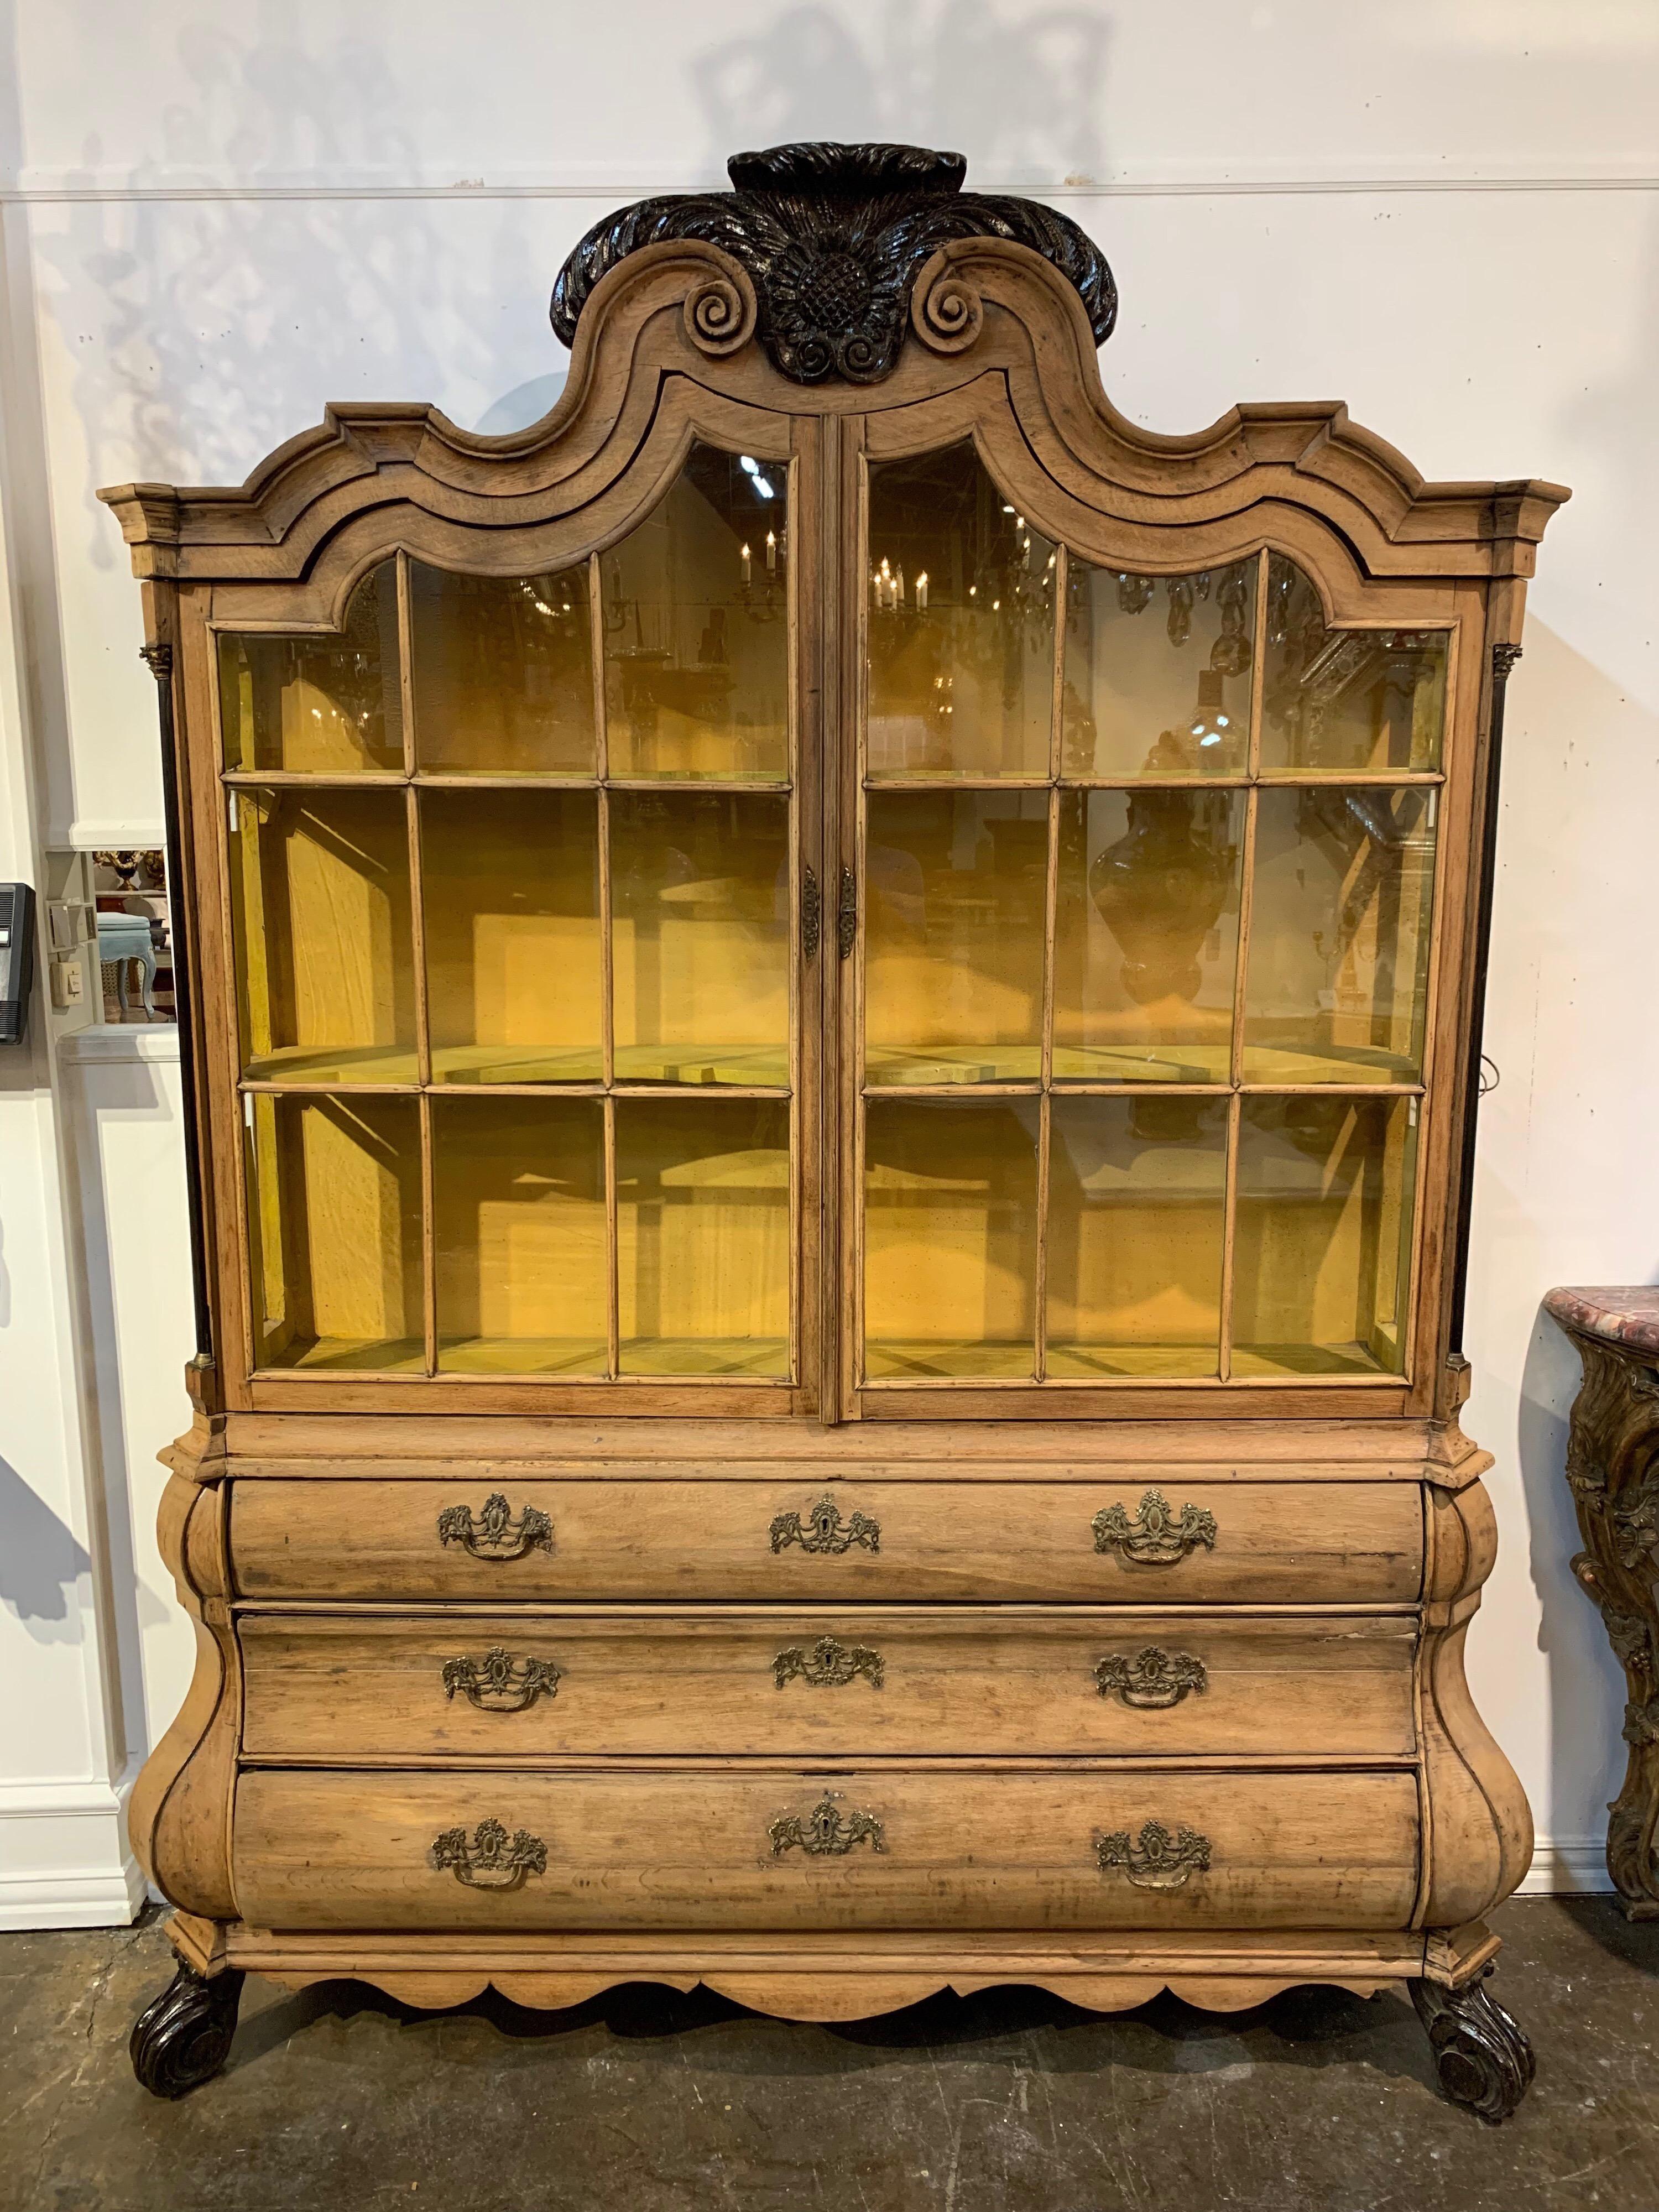 Very fine 19th century Dutch bleached oak and ebonized display cabinet. Beautiful carvings and abundant storage as well. A truly unique piece.